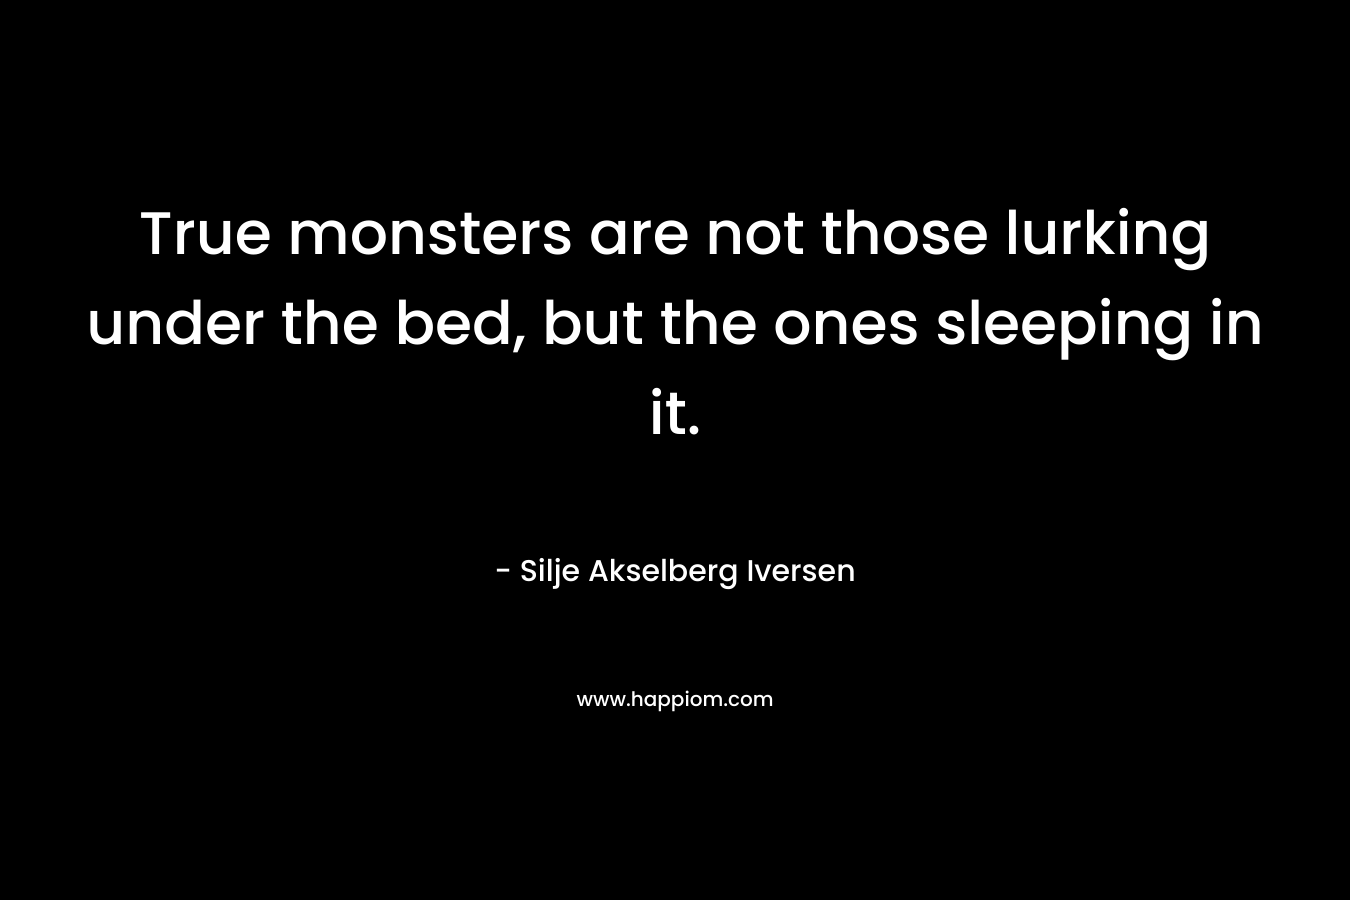 True monsters are not those lurking under the bed, but the ones sleeping in it. – Silje Akselberg Iversen